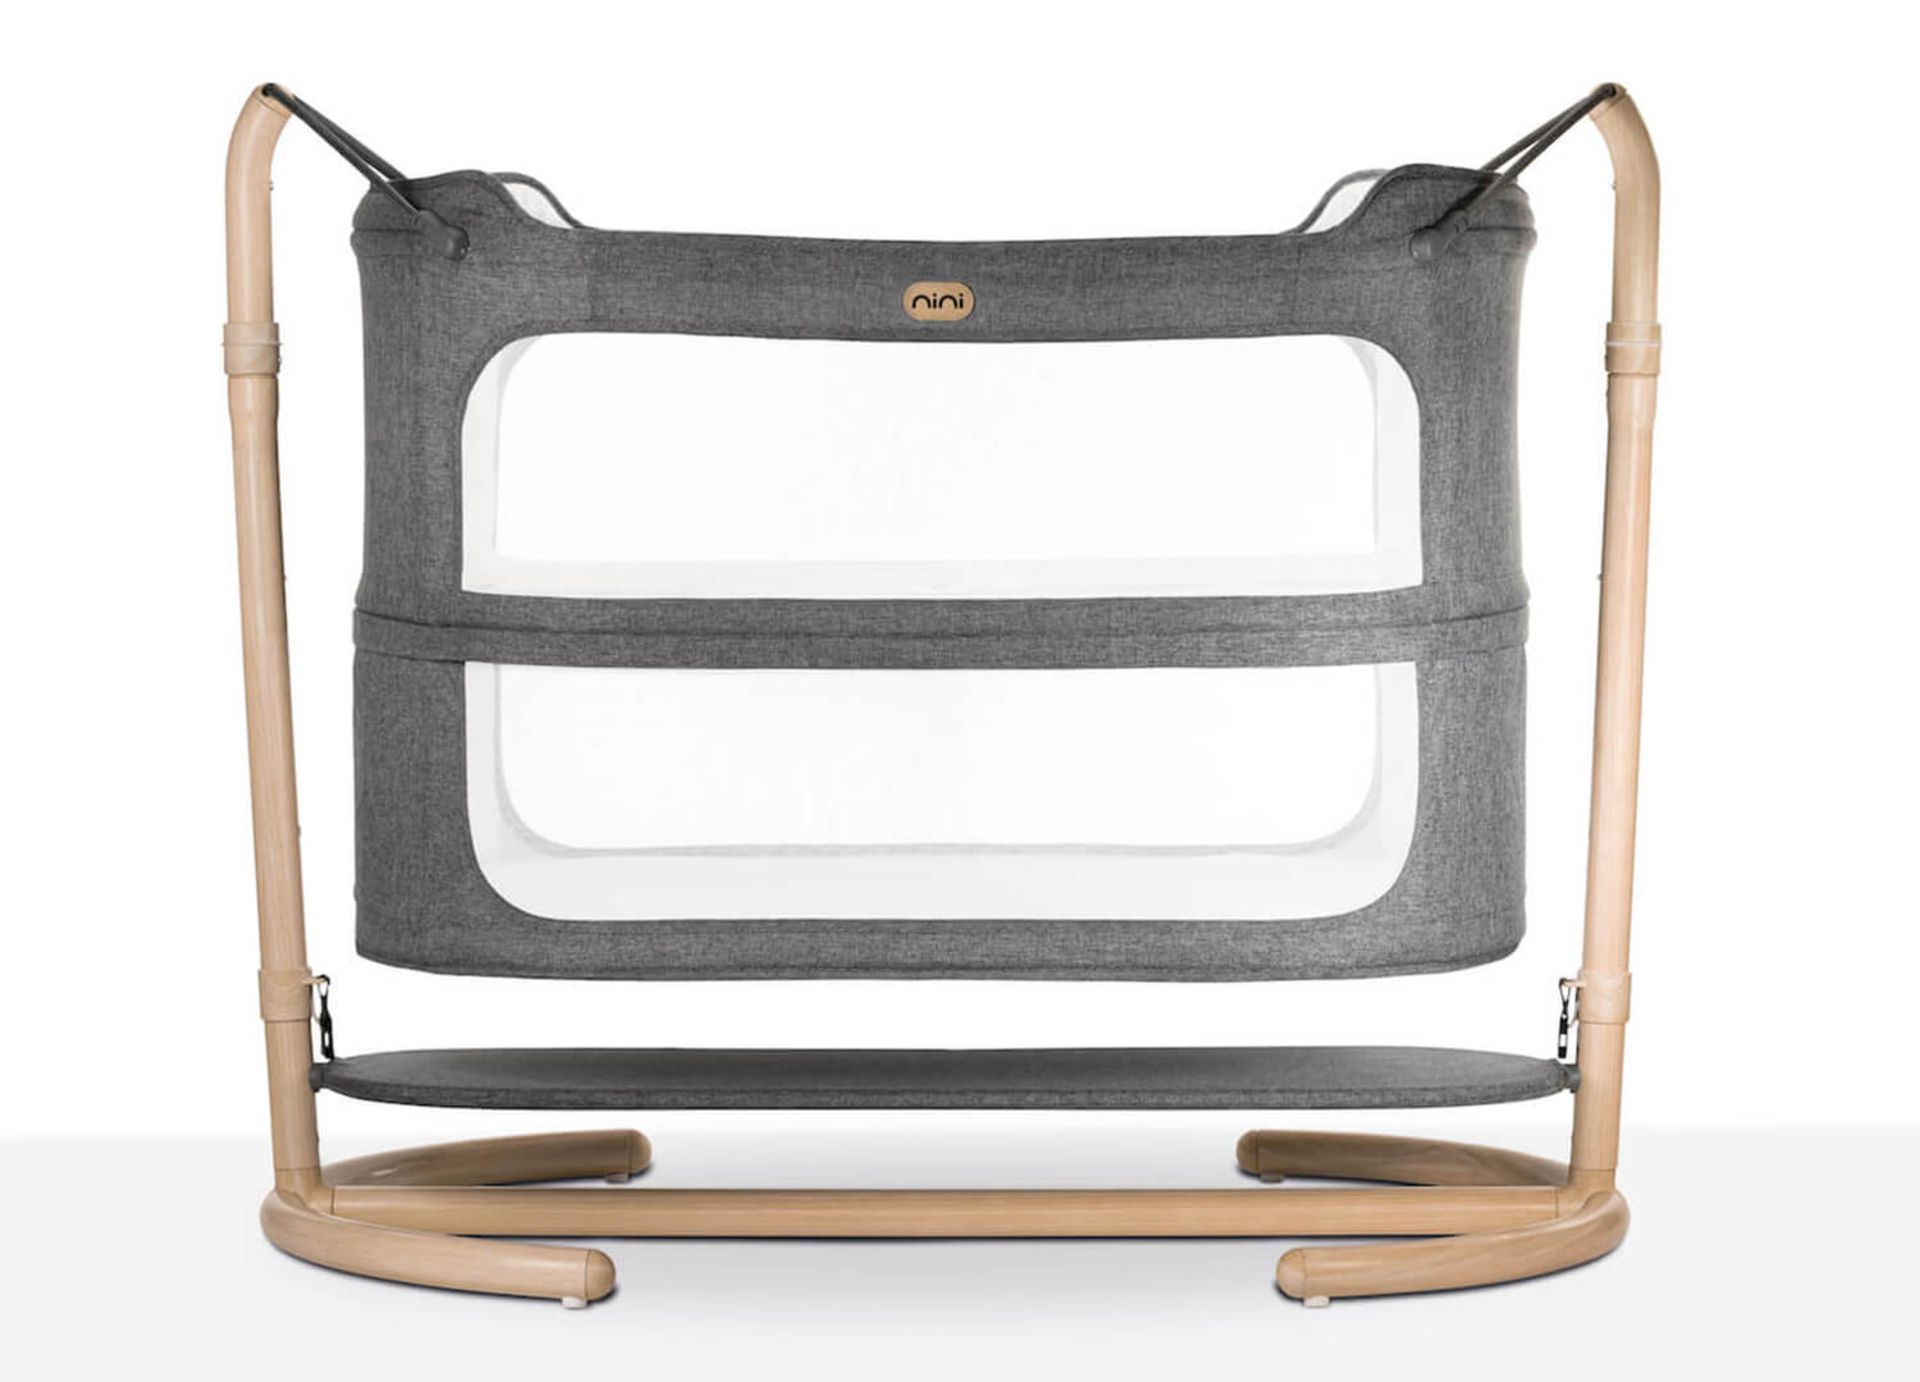 Trade Lot 5 x New & Boxed NiniPod Luxury Childrens Cot. RRP £299. • Calming swinging & bouncing